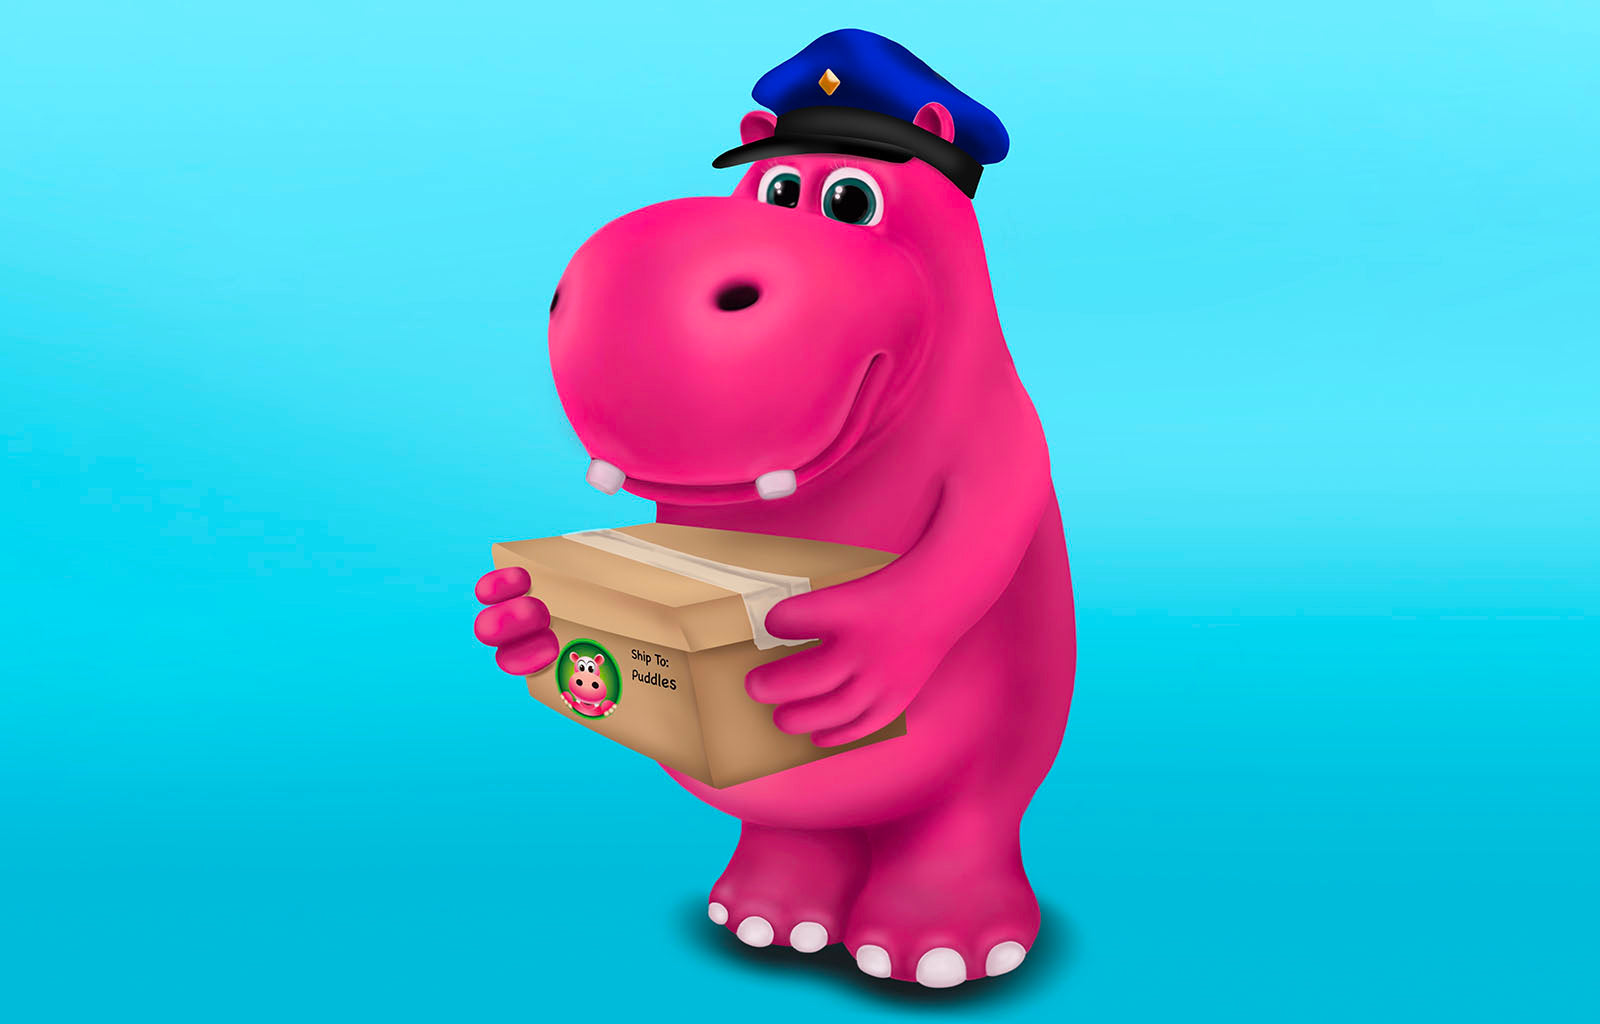 Featured image of Happy Hippo Puddles character shipping a package of kratom powder